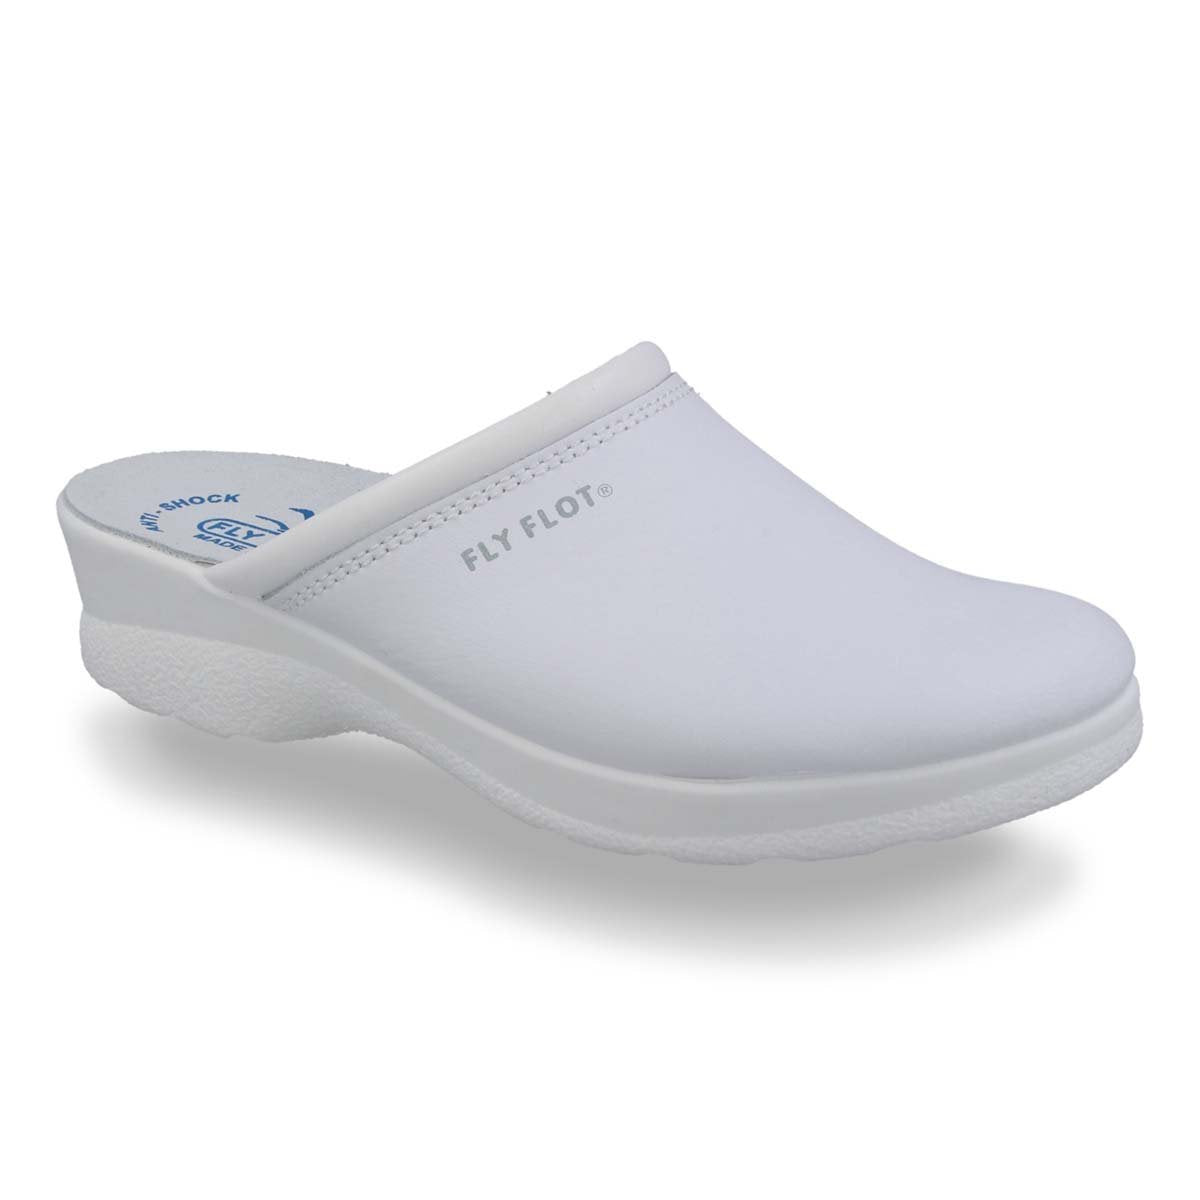 See the Leather Professional Women Clogs in the colour BLUE, available in various sizes